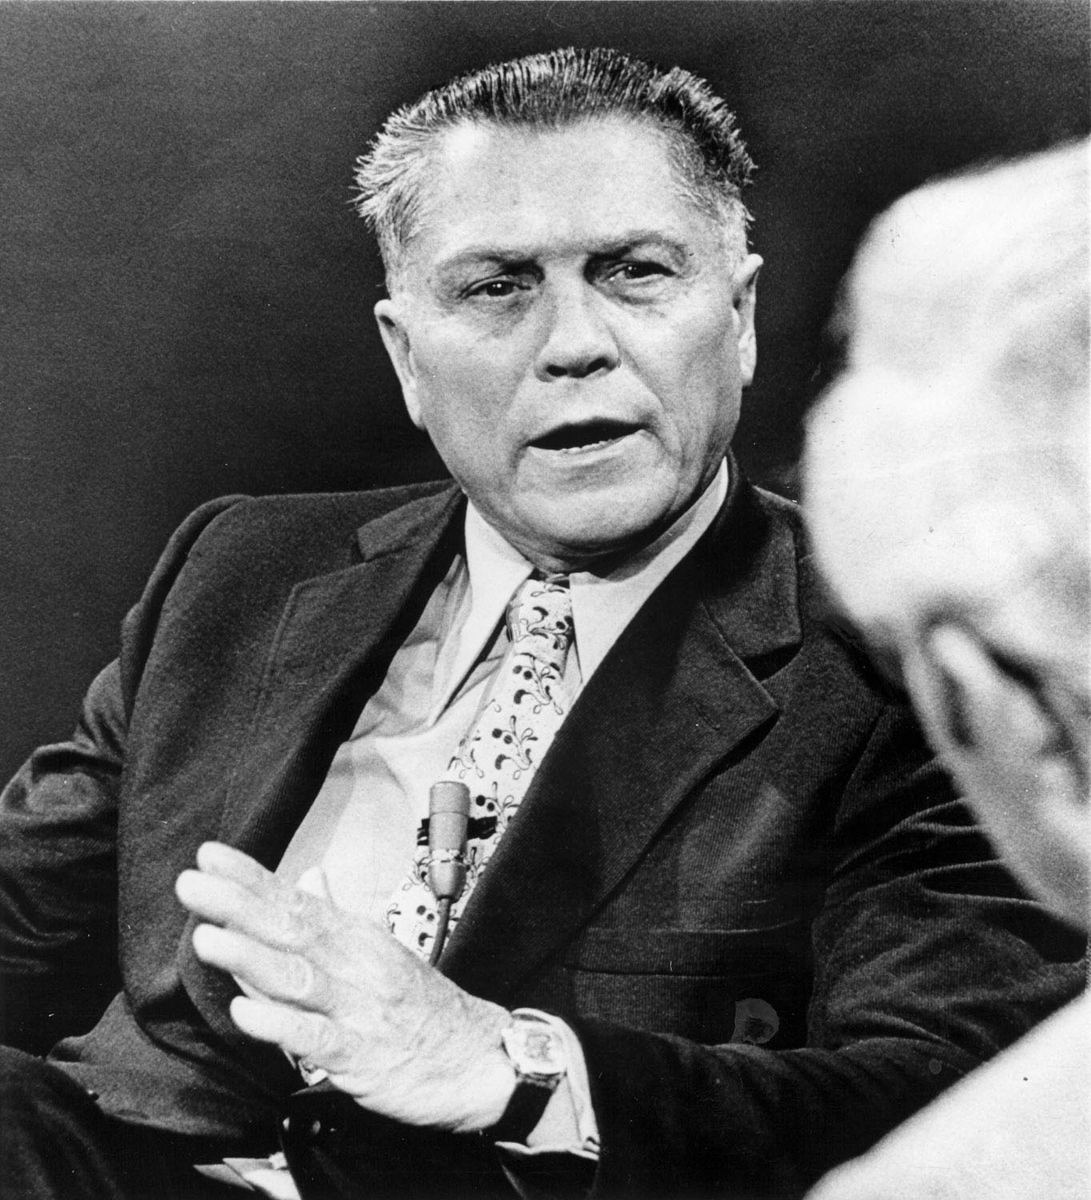 1952 - Hoffa becomes VP of IBT1964 - IBT wins a national agreement1967 - Hoffa goes to prison1971 - out of prisonHoffa barred from leadership till 1980s1975 - Hoffa disappears (dies)